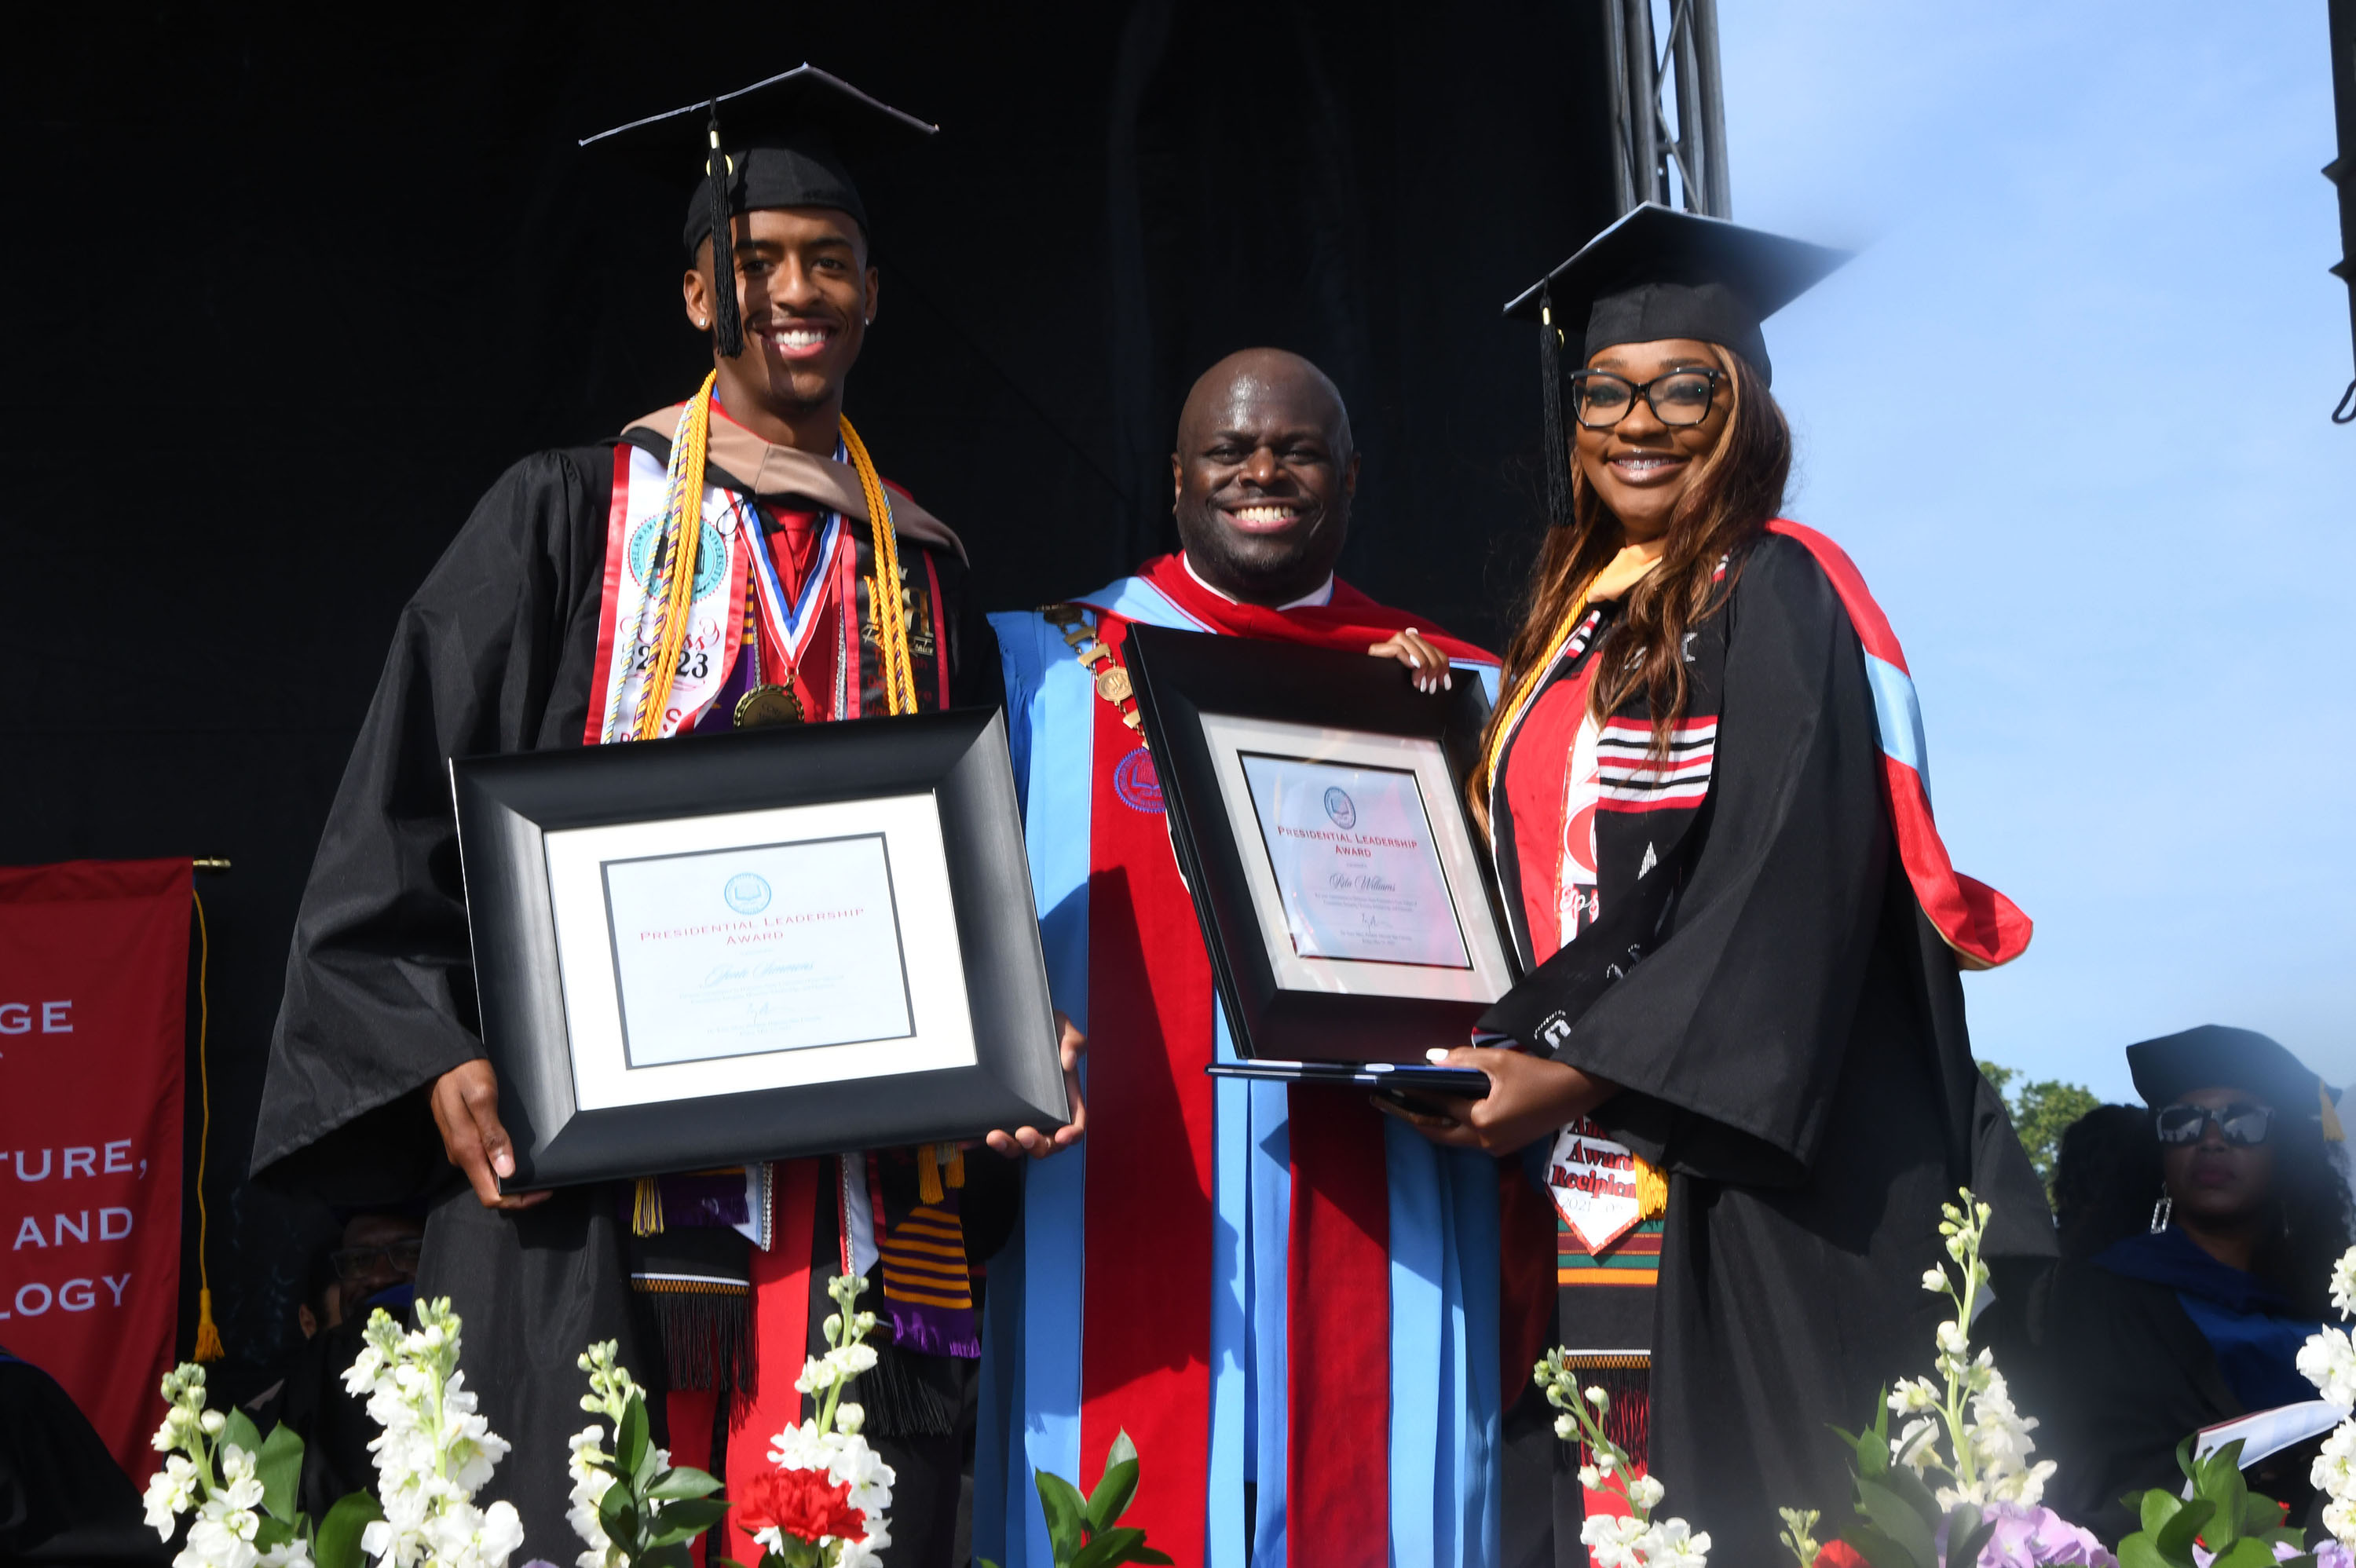 Jonte Simmons (l) and Rita Williams (r) receive the Presidential Leadership Award from Dr. Tony Allen.